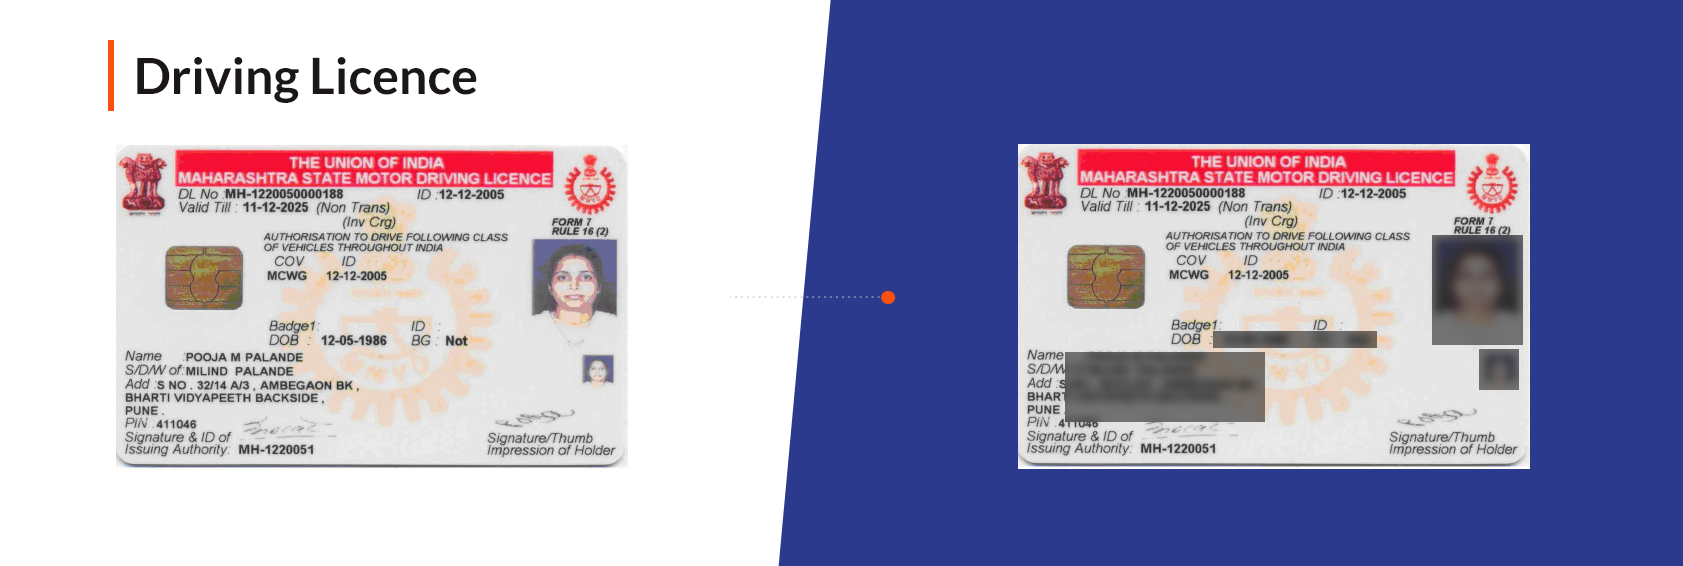 Masked Driving Licence